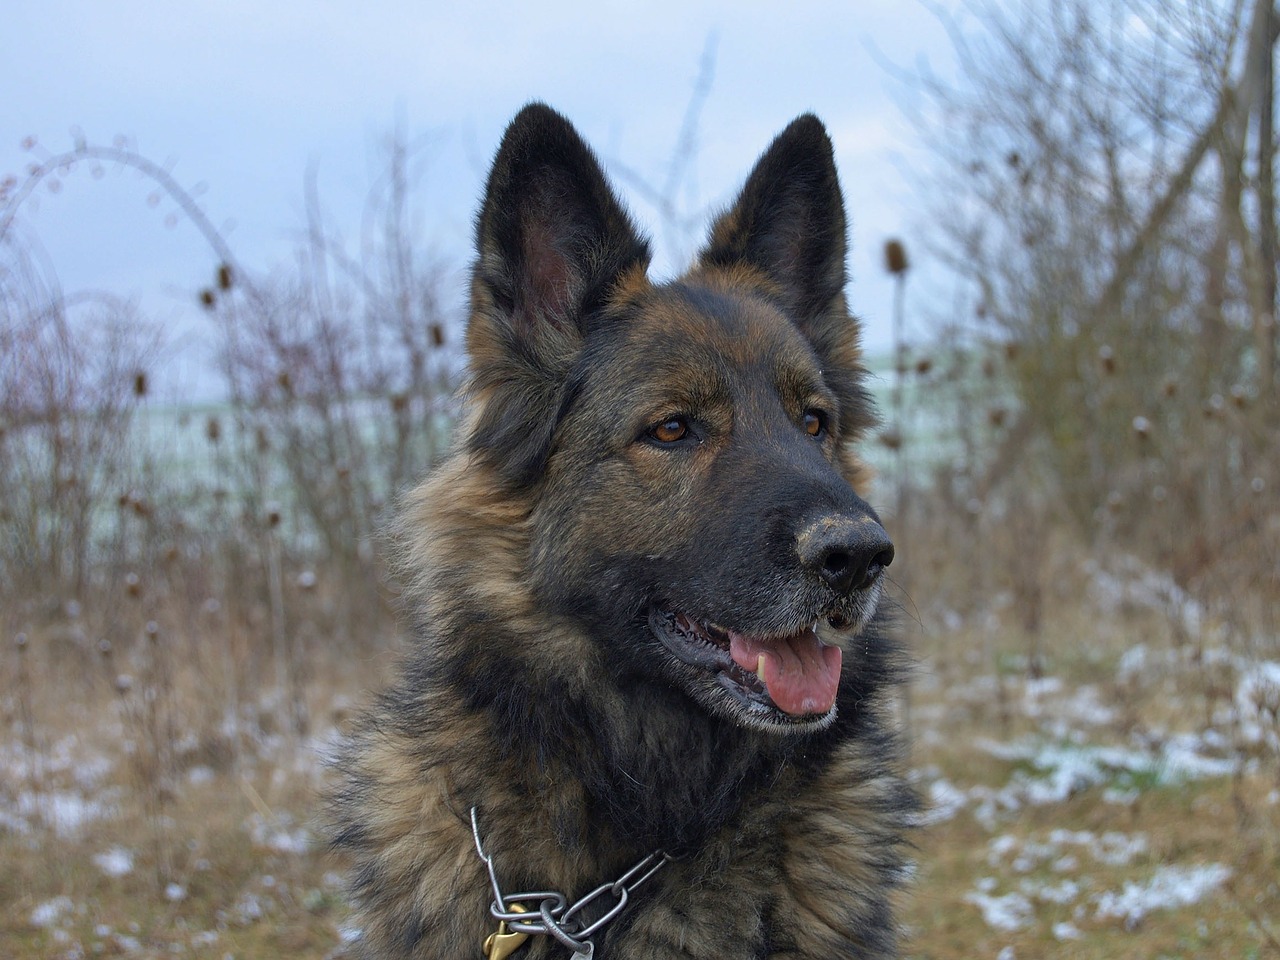 Sable German Shepherd: How different are they?